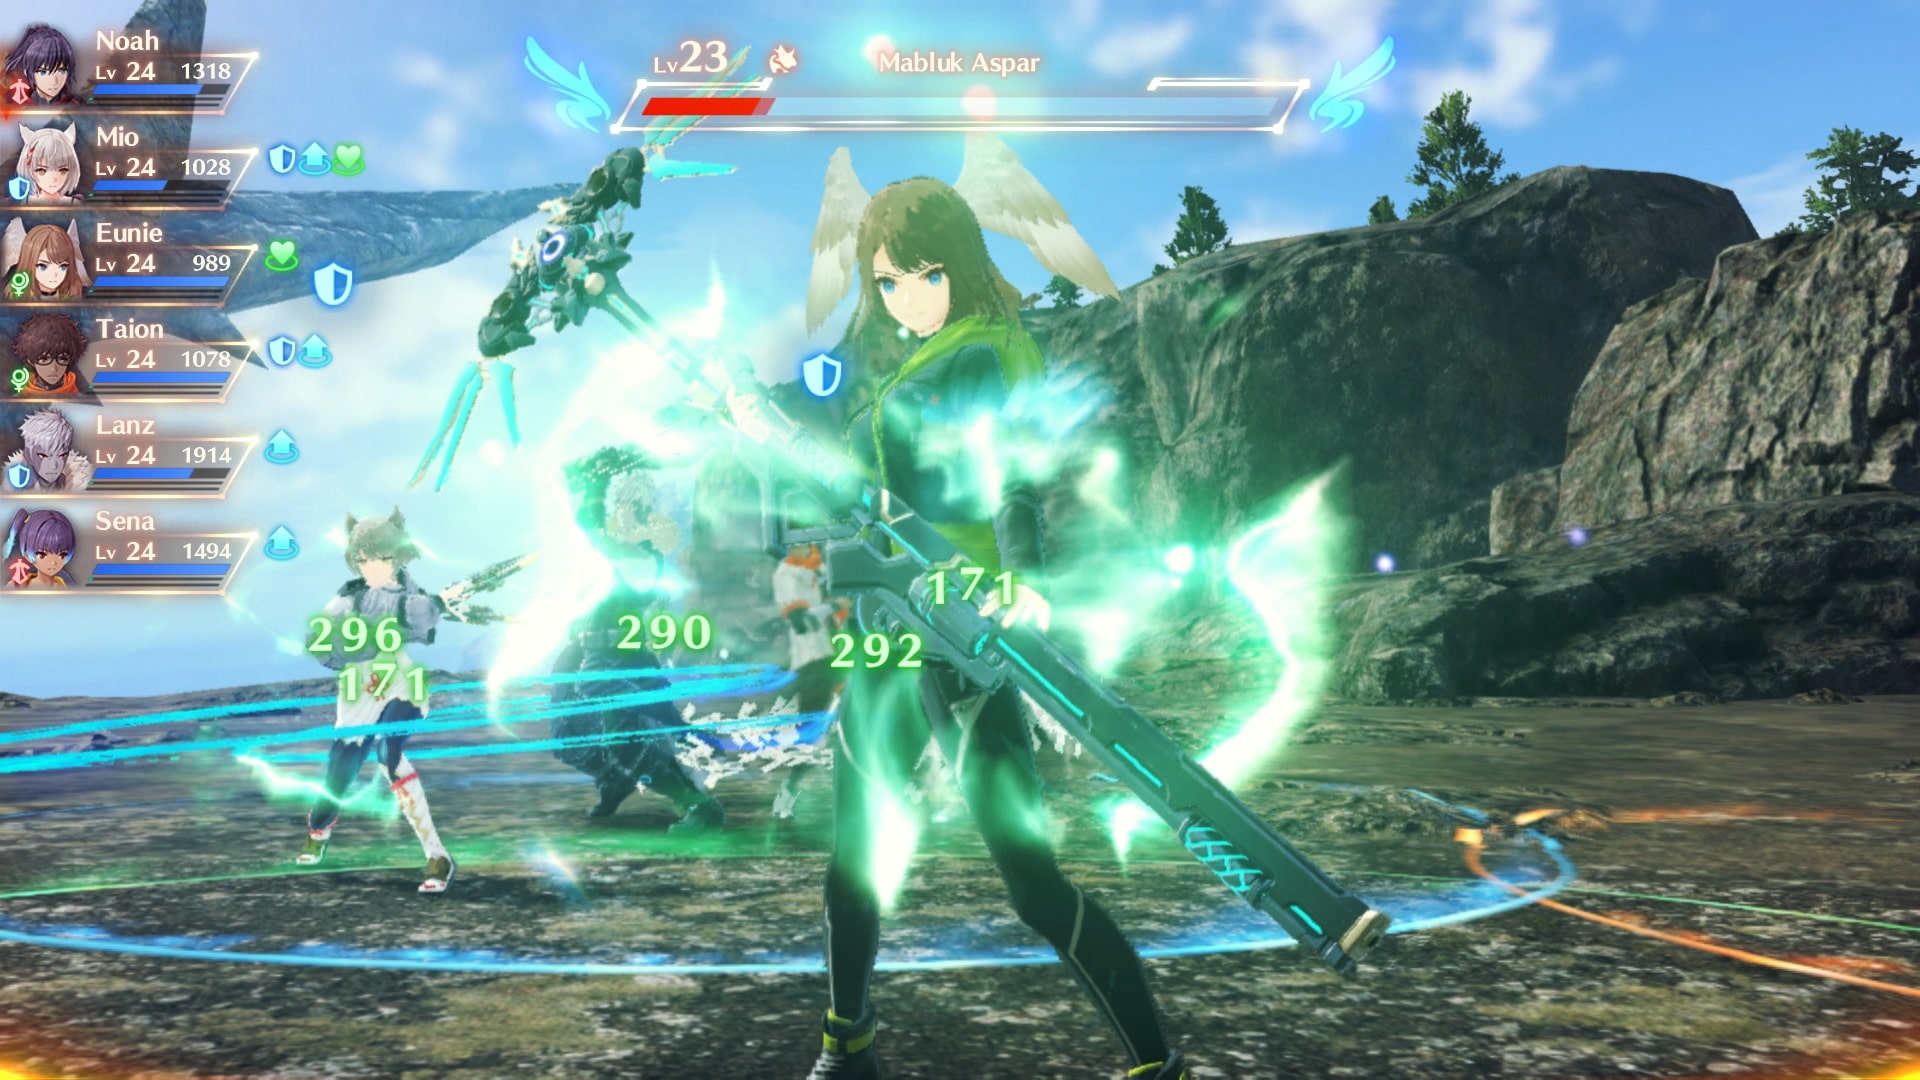 Xenoblade Chronicles 3 Nintendo Switch Review - Is It Worth It? 